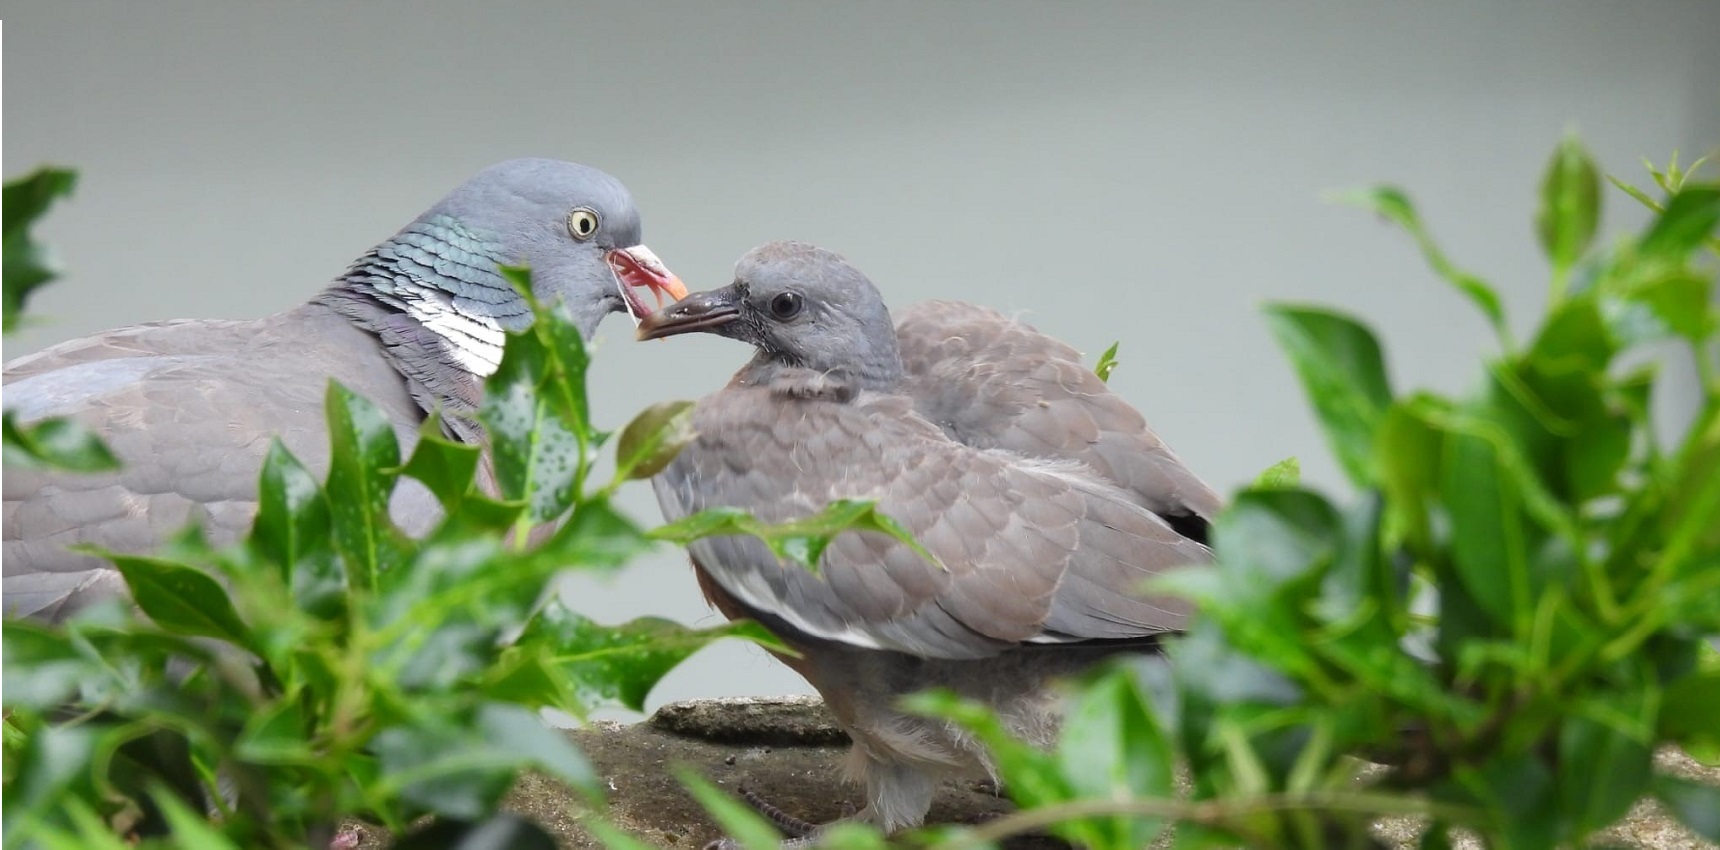 a pigeon squab or chick is being fed by a parent bird.